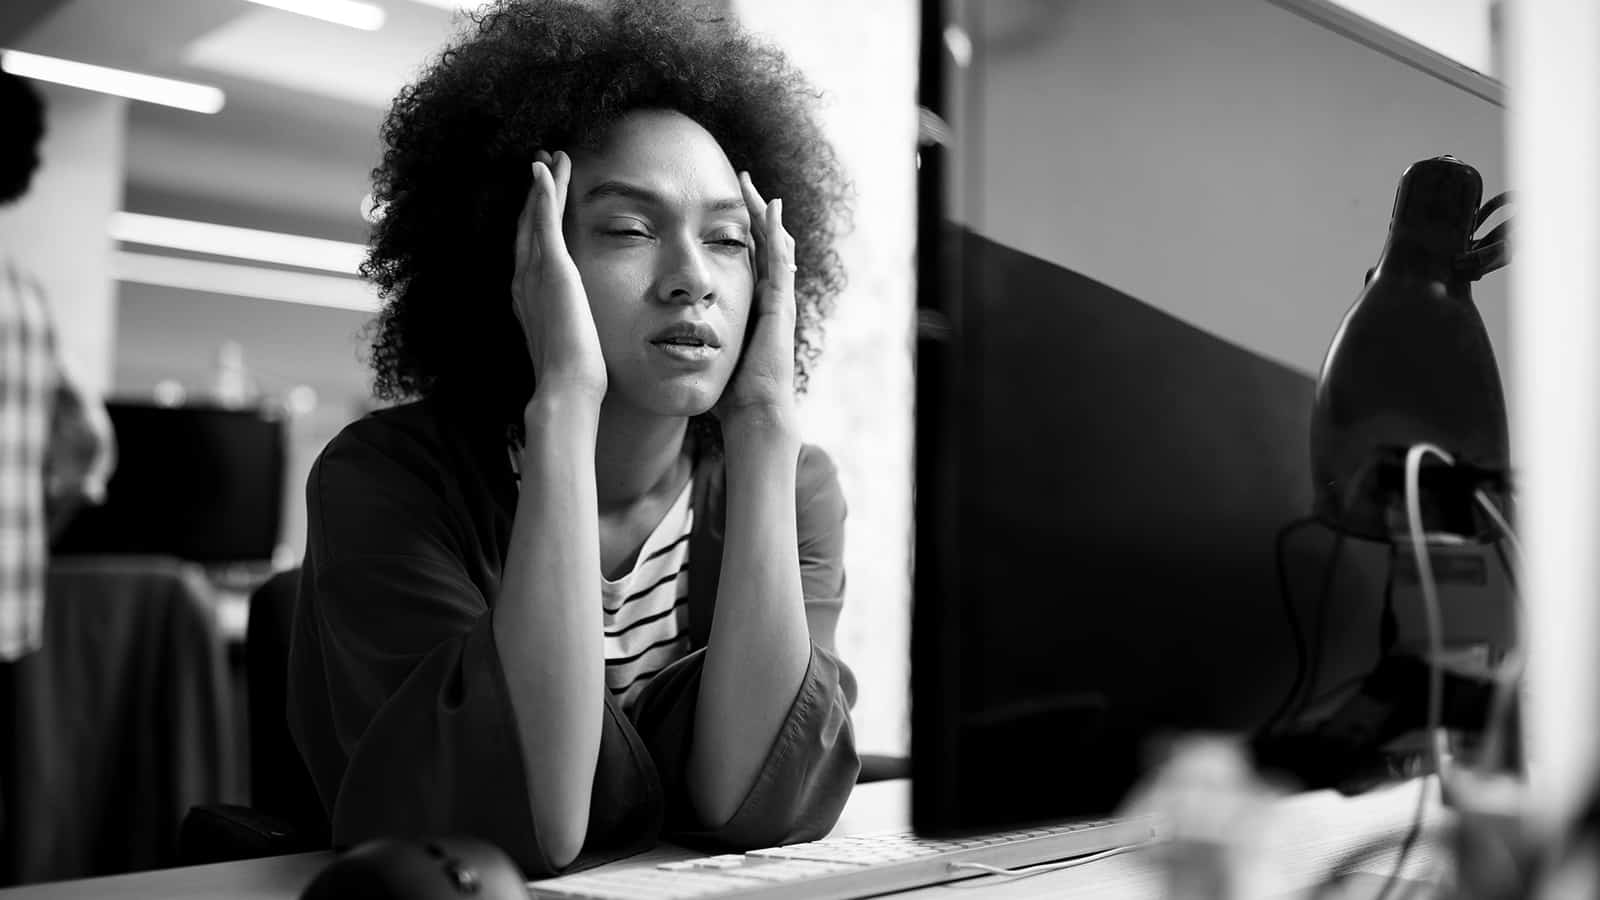 10 Things to Help You Refocus When You Feel Frustrated